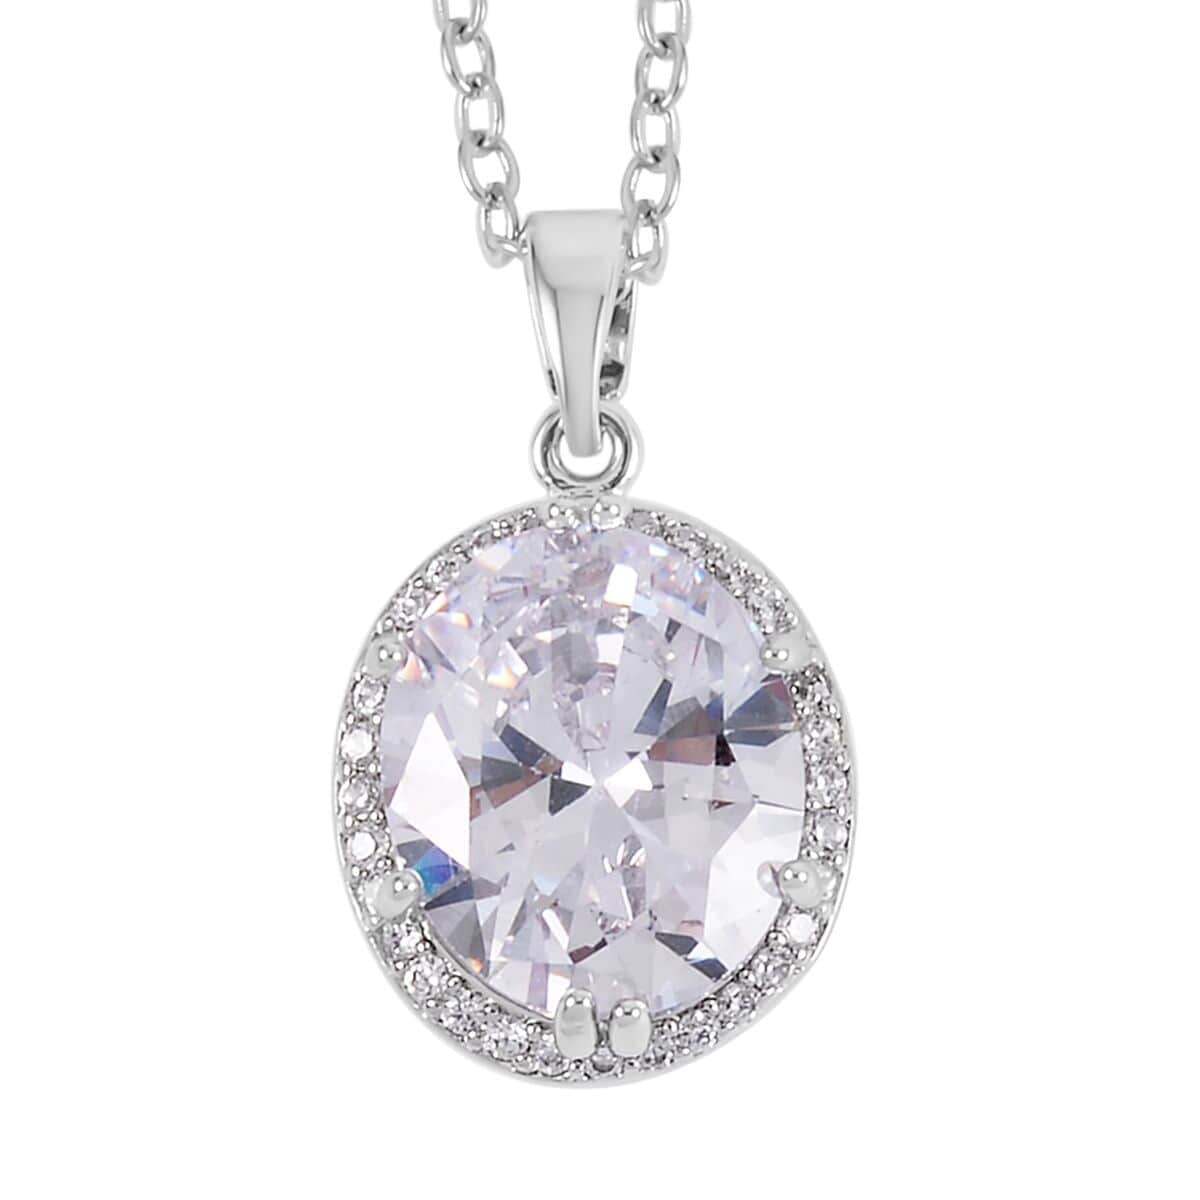 Simulated White Diamond Earrings, Halo Ring (Size 9.0) and Pendant Necklace in Silvertone 20-22 Inches image number 5